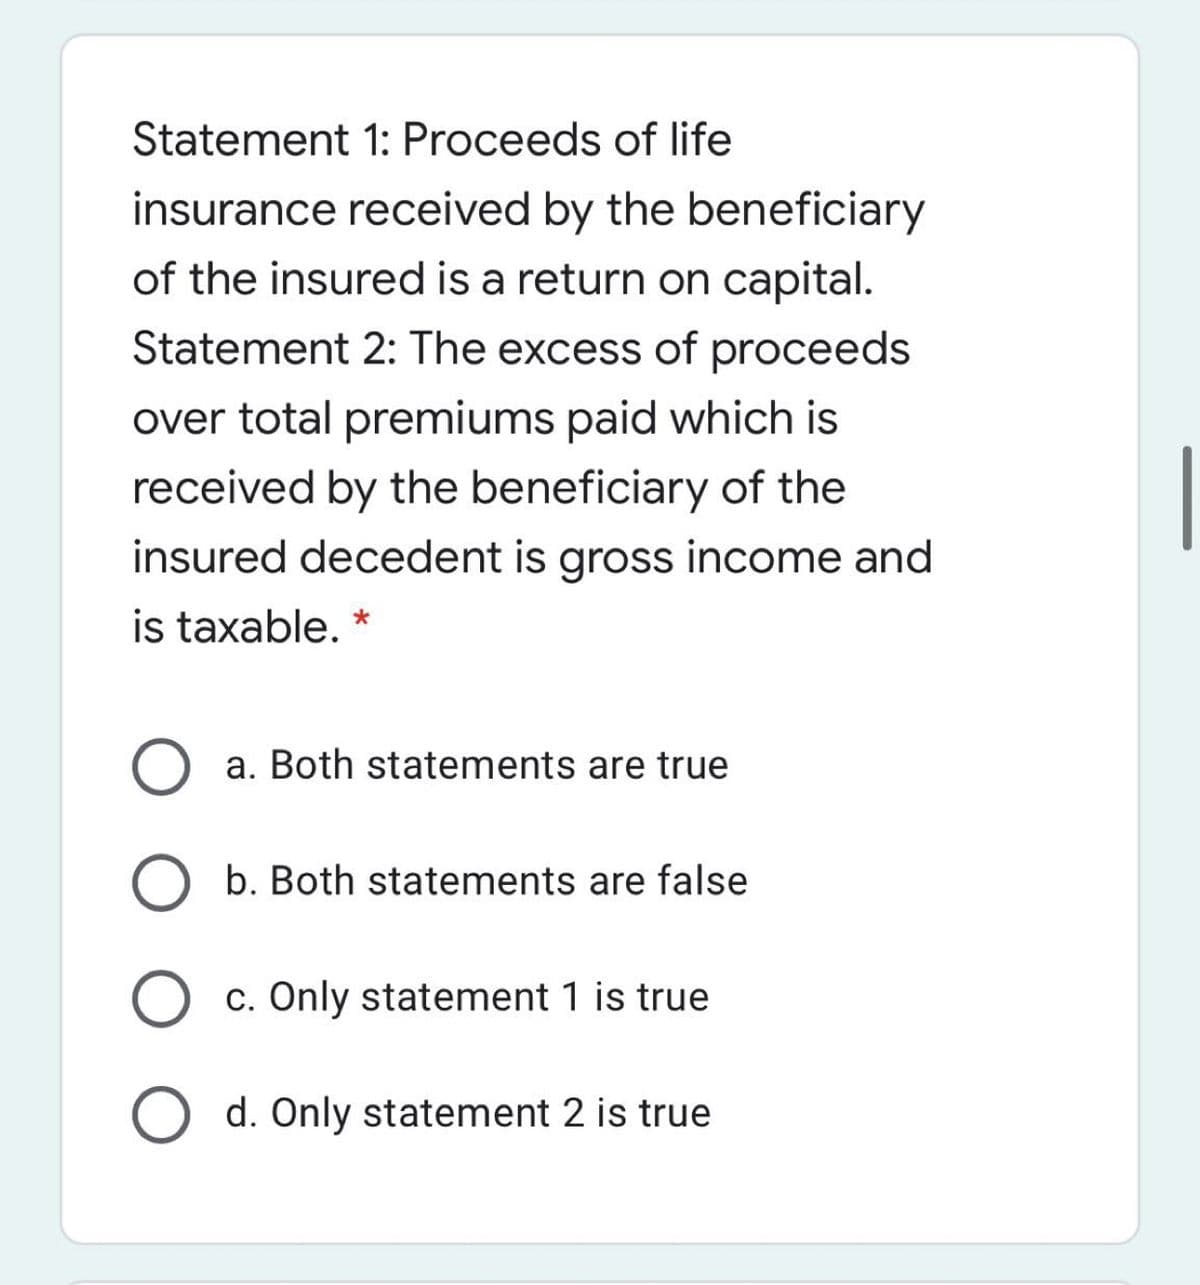 Statement 1: Proceeds of life
insurance received by the beneficiary
of the insured is a return on capital.
Statement 2: The excess of proceeds
over total premiums paid which is
received by the beneficiary of the
insured decedent is gross income and
is taxable. *
a. Both statements are true
b. Both statements are false
c. Only statement 1 is true
d. Only statement 2 is true
